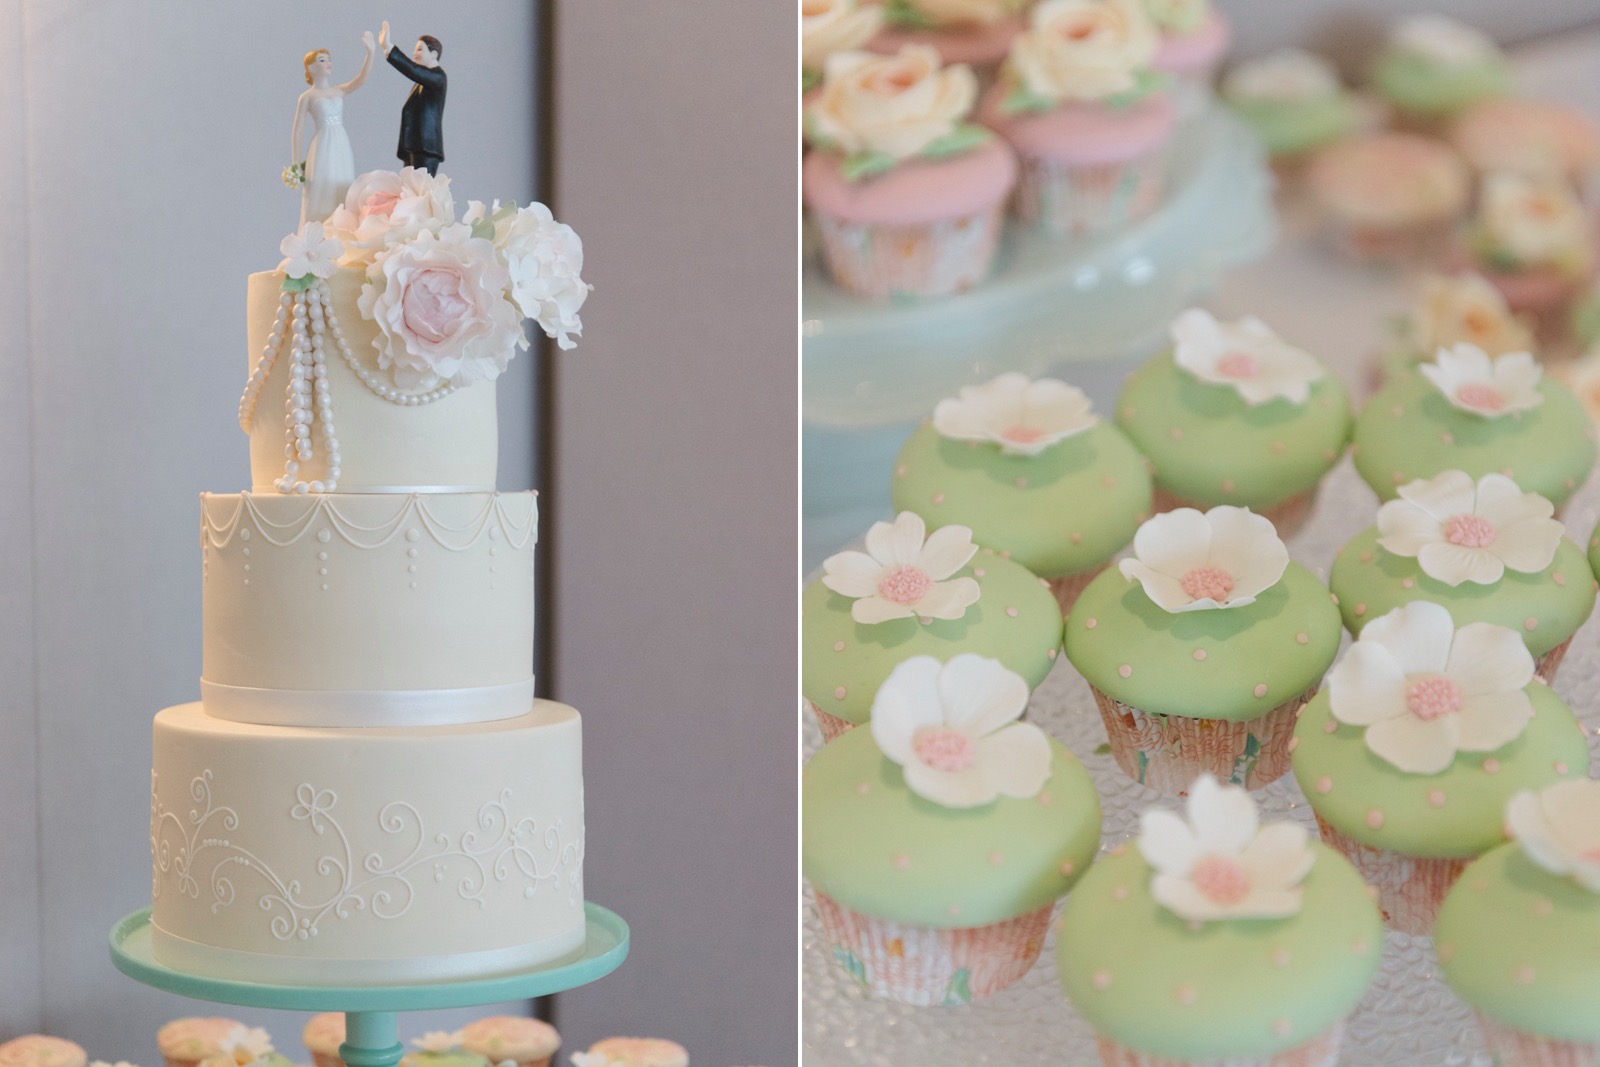 wedding cake and cupcakes at le belvedere